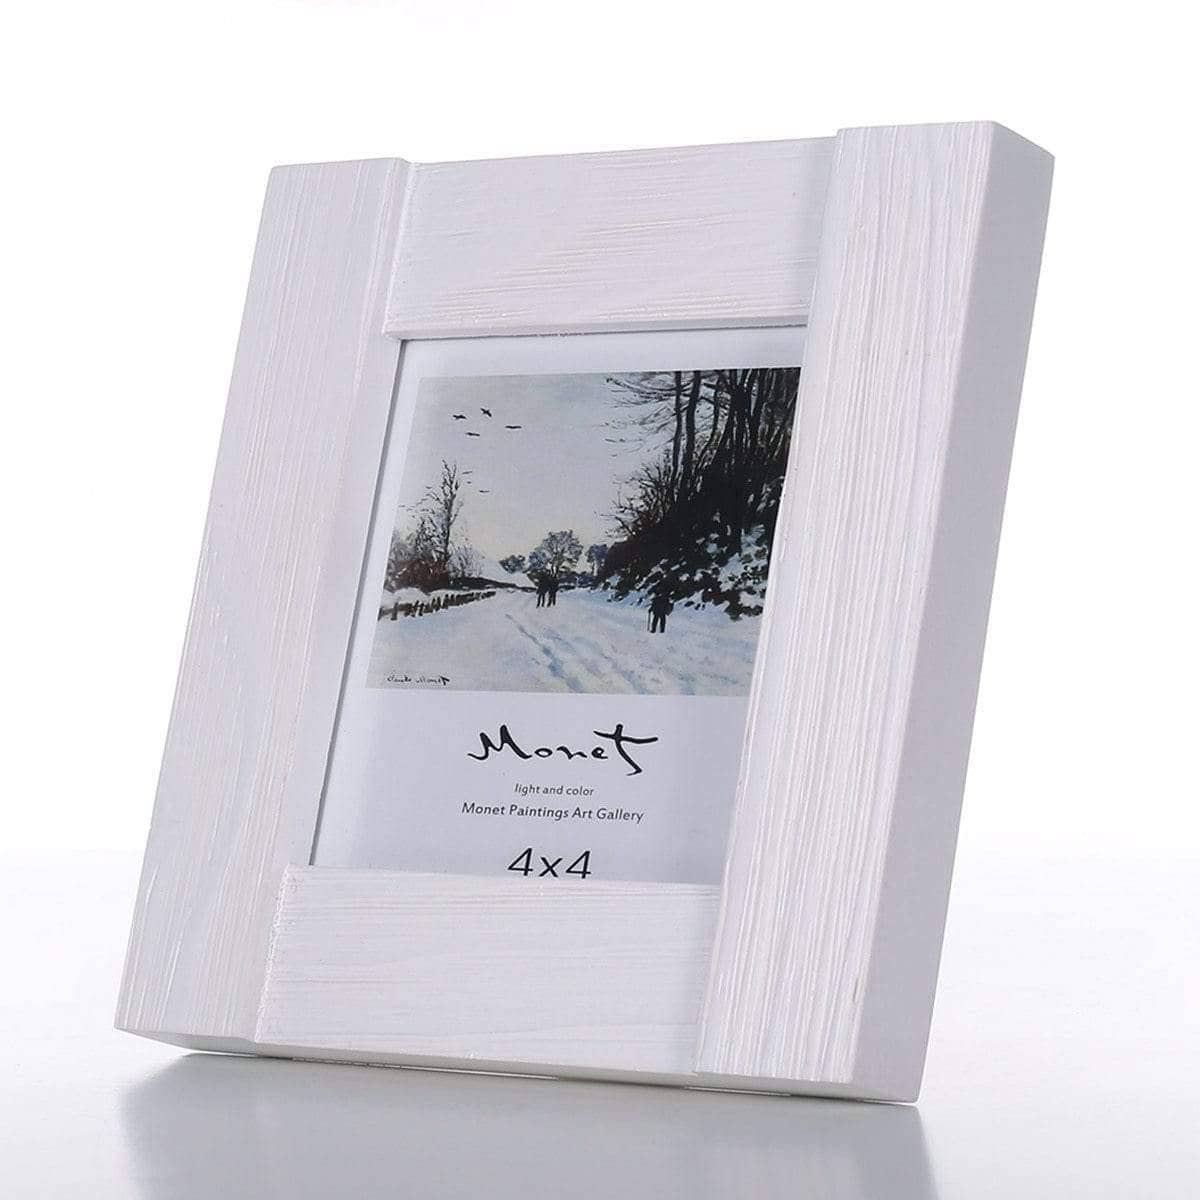 Craft Wood Photo Picture Frame - Rustic & Stylish Home Decor